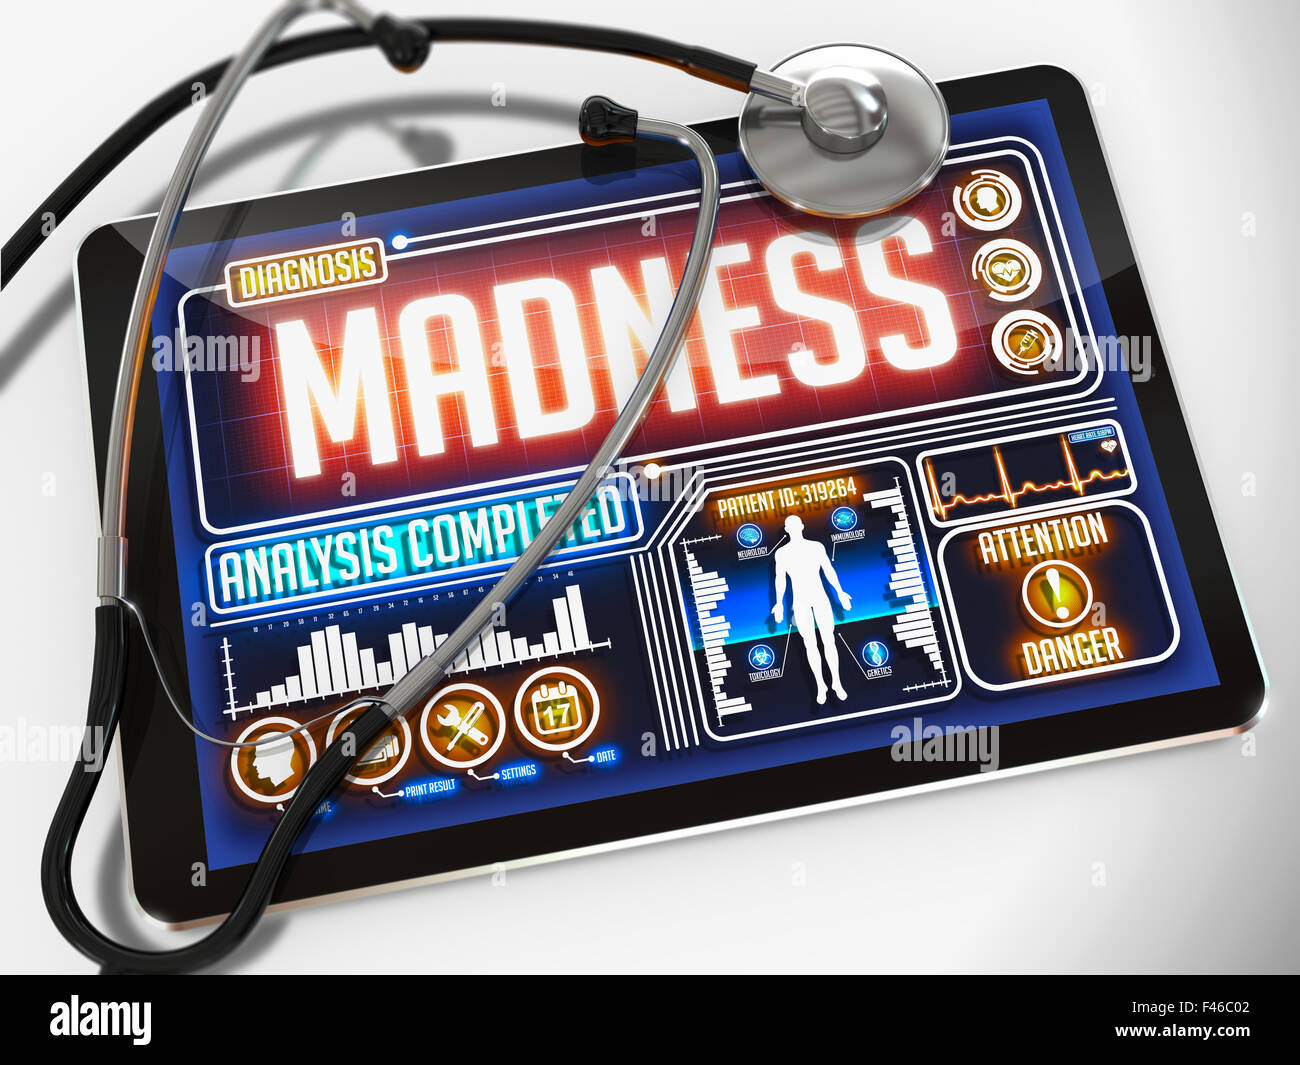 Madness sul display del Medical Tablet. Foto Stock